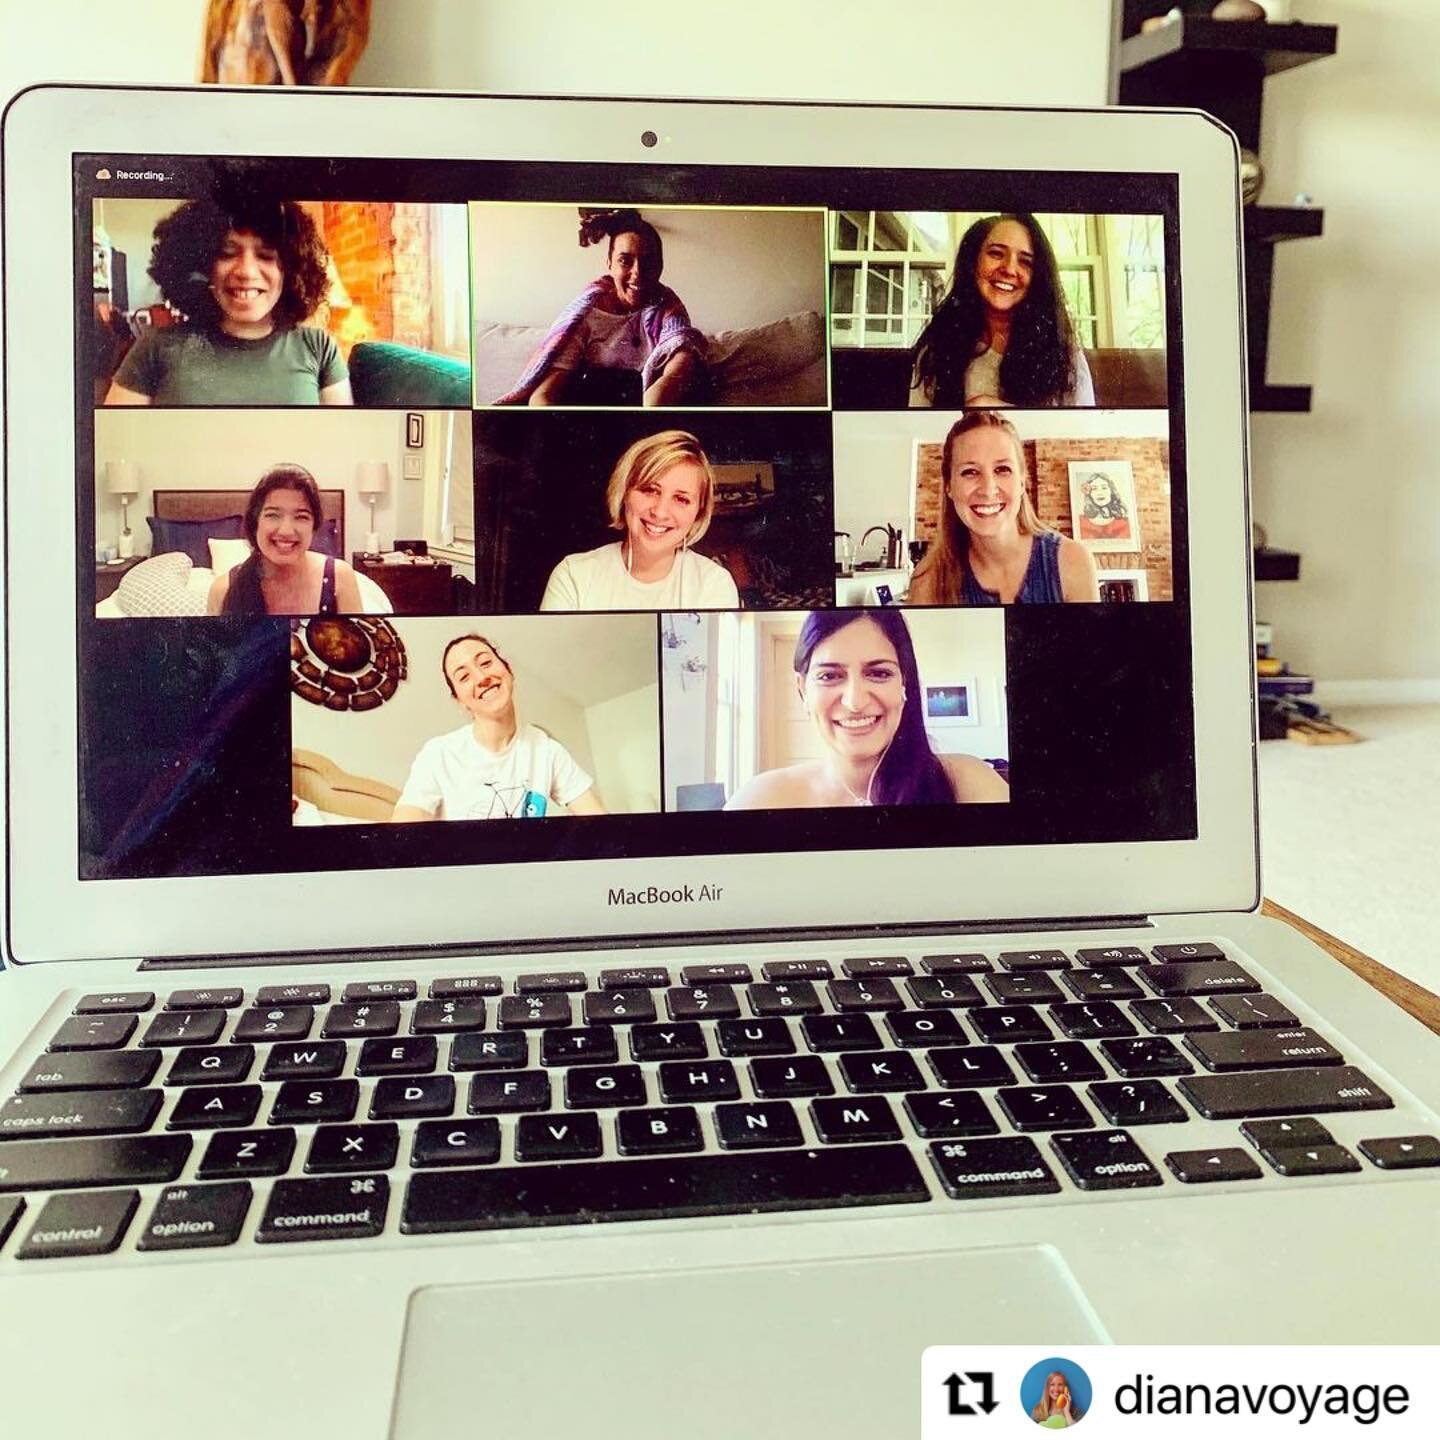 This group, these women, have come to mean so much to me. #Repost @dianavoyage with @make_repost
・・・
a year ago, I formed a small writing group with some of my best gals. we used @suleikajaouad&rsquo;s prompts from #theisolationjournals as our guidin